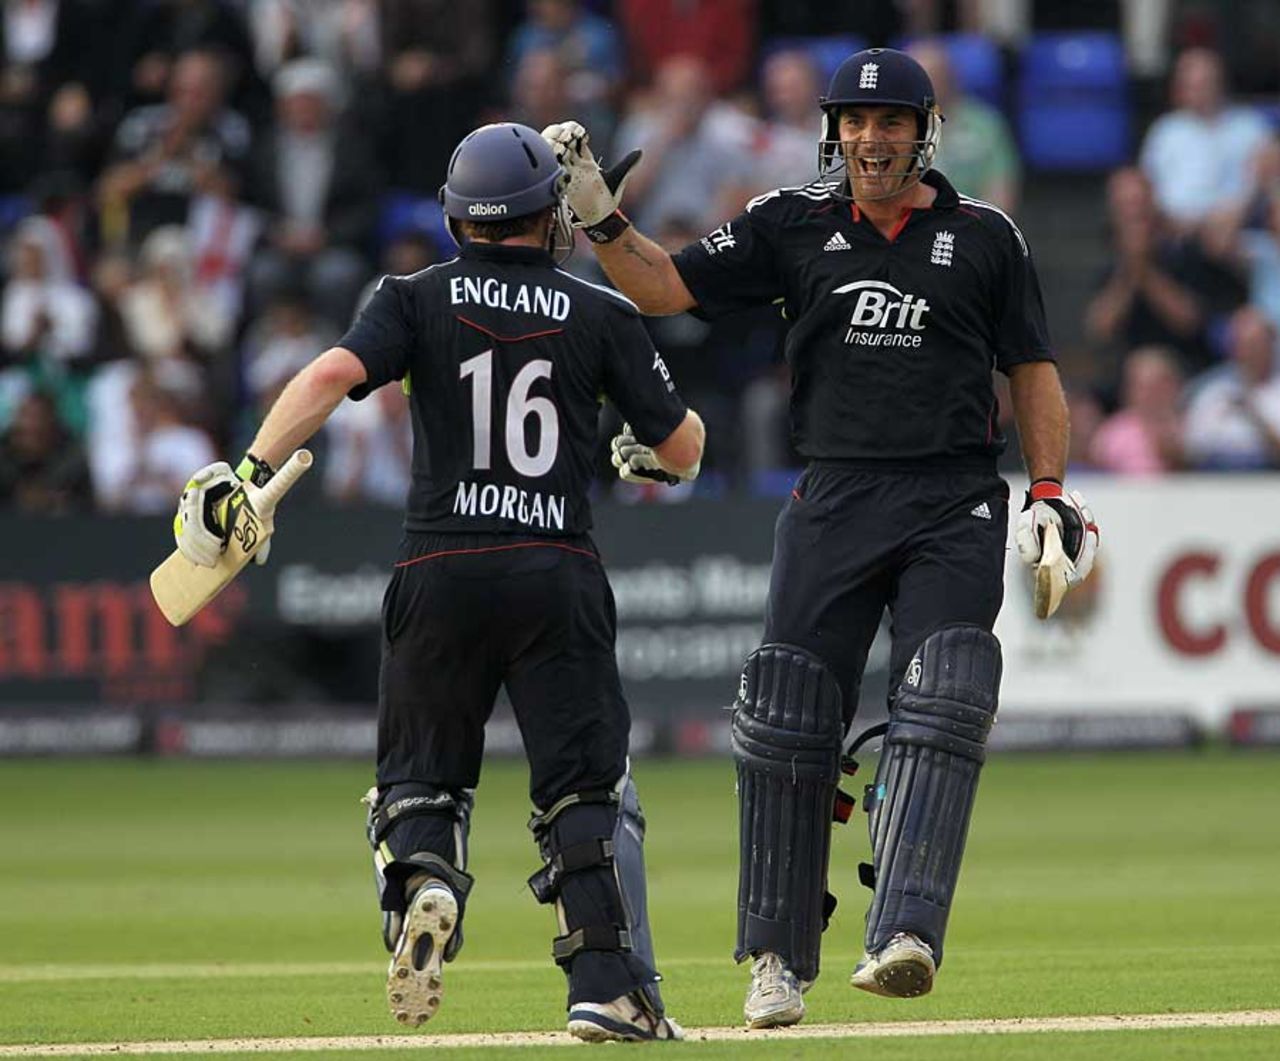 Michael Yardy and Eoin Morgan celebrate their match-winning stand, England v Pakistan, 1st T20I, Cardiff, September 5, 2010